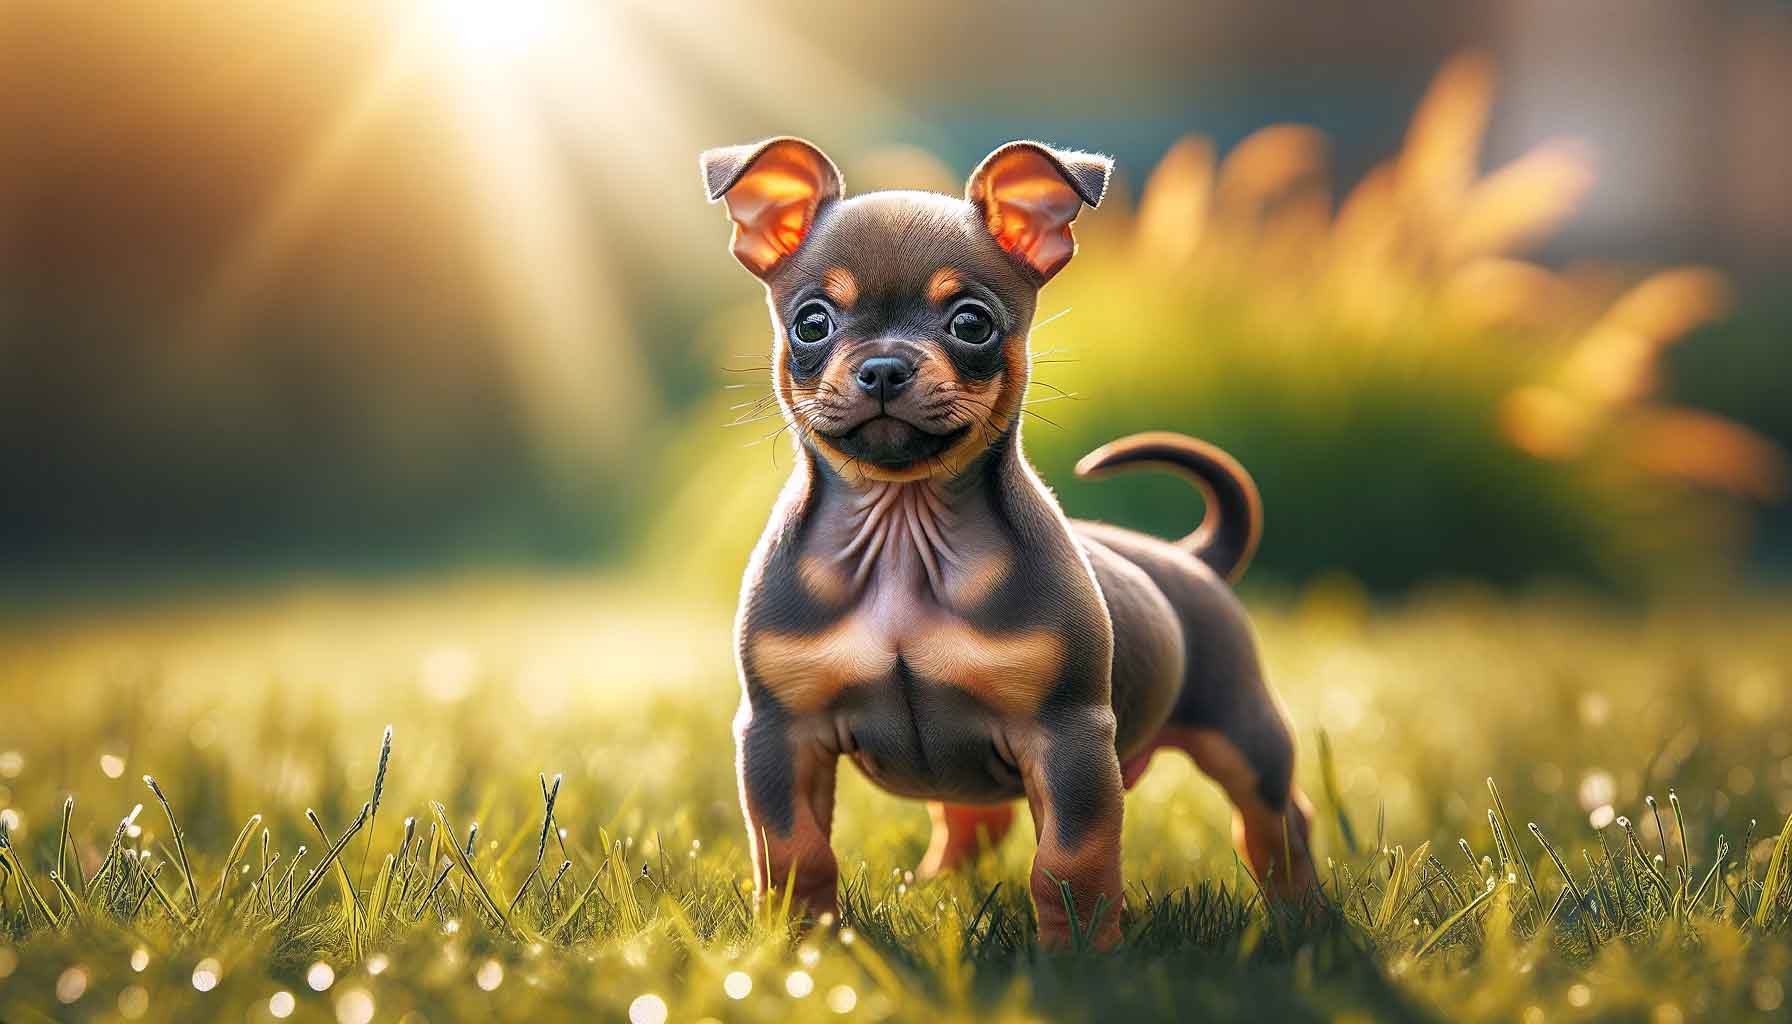 A photograph of a playful and tiny Micro Bully Chihuahua mix puppy, standing in a sunlit grassy field. The puppy's muscular yet slender body and coat, gleaming with a mix of its parents' colors, reflects its energetic and friendly nature. The grassy field under the sunlight emphasizes the puppy's vibrant and lively personality.